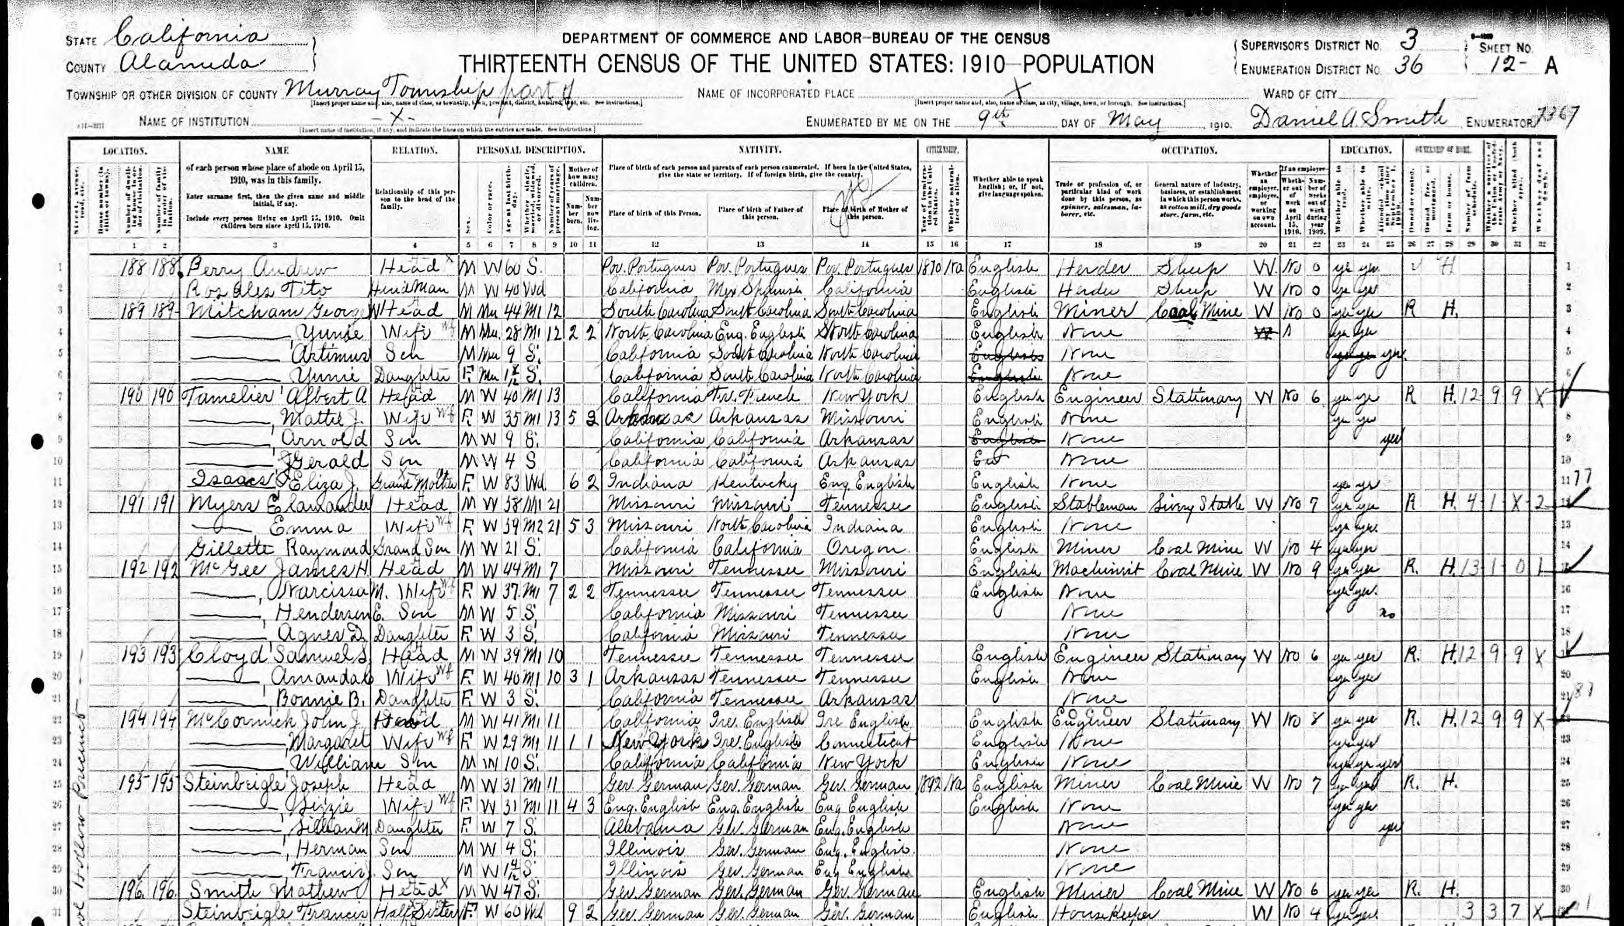 A page of the 1 9 0 5 census.